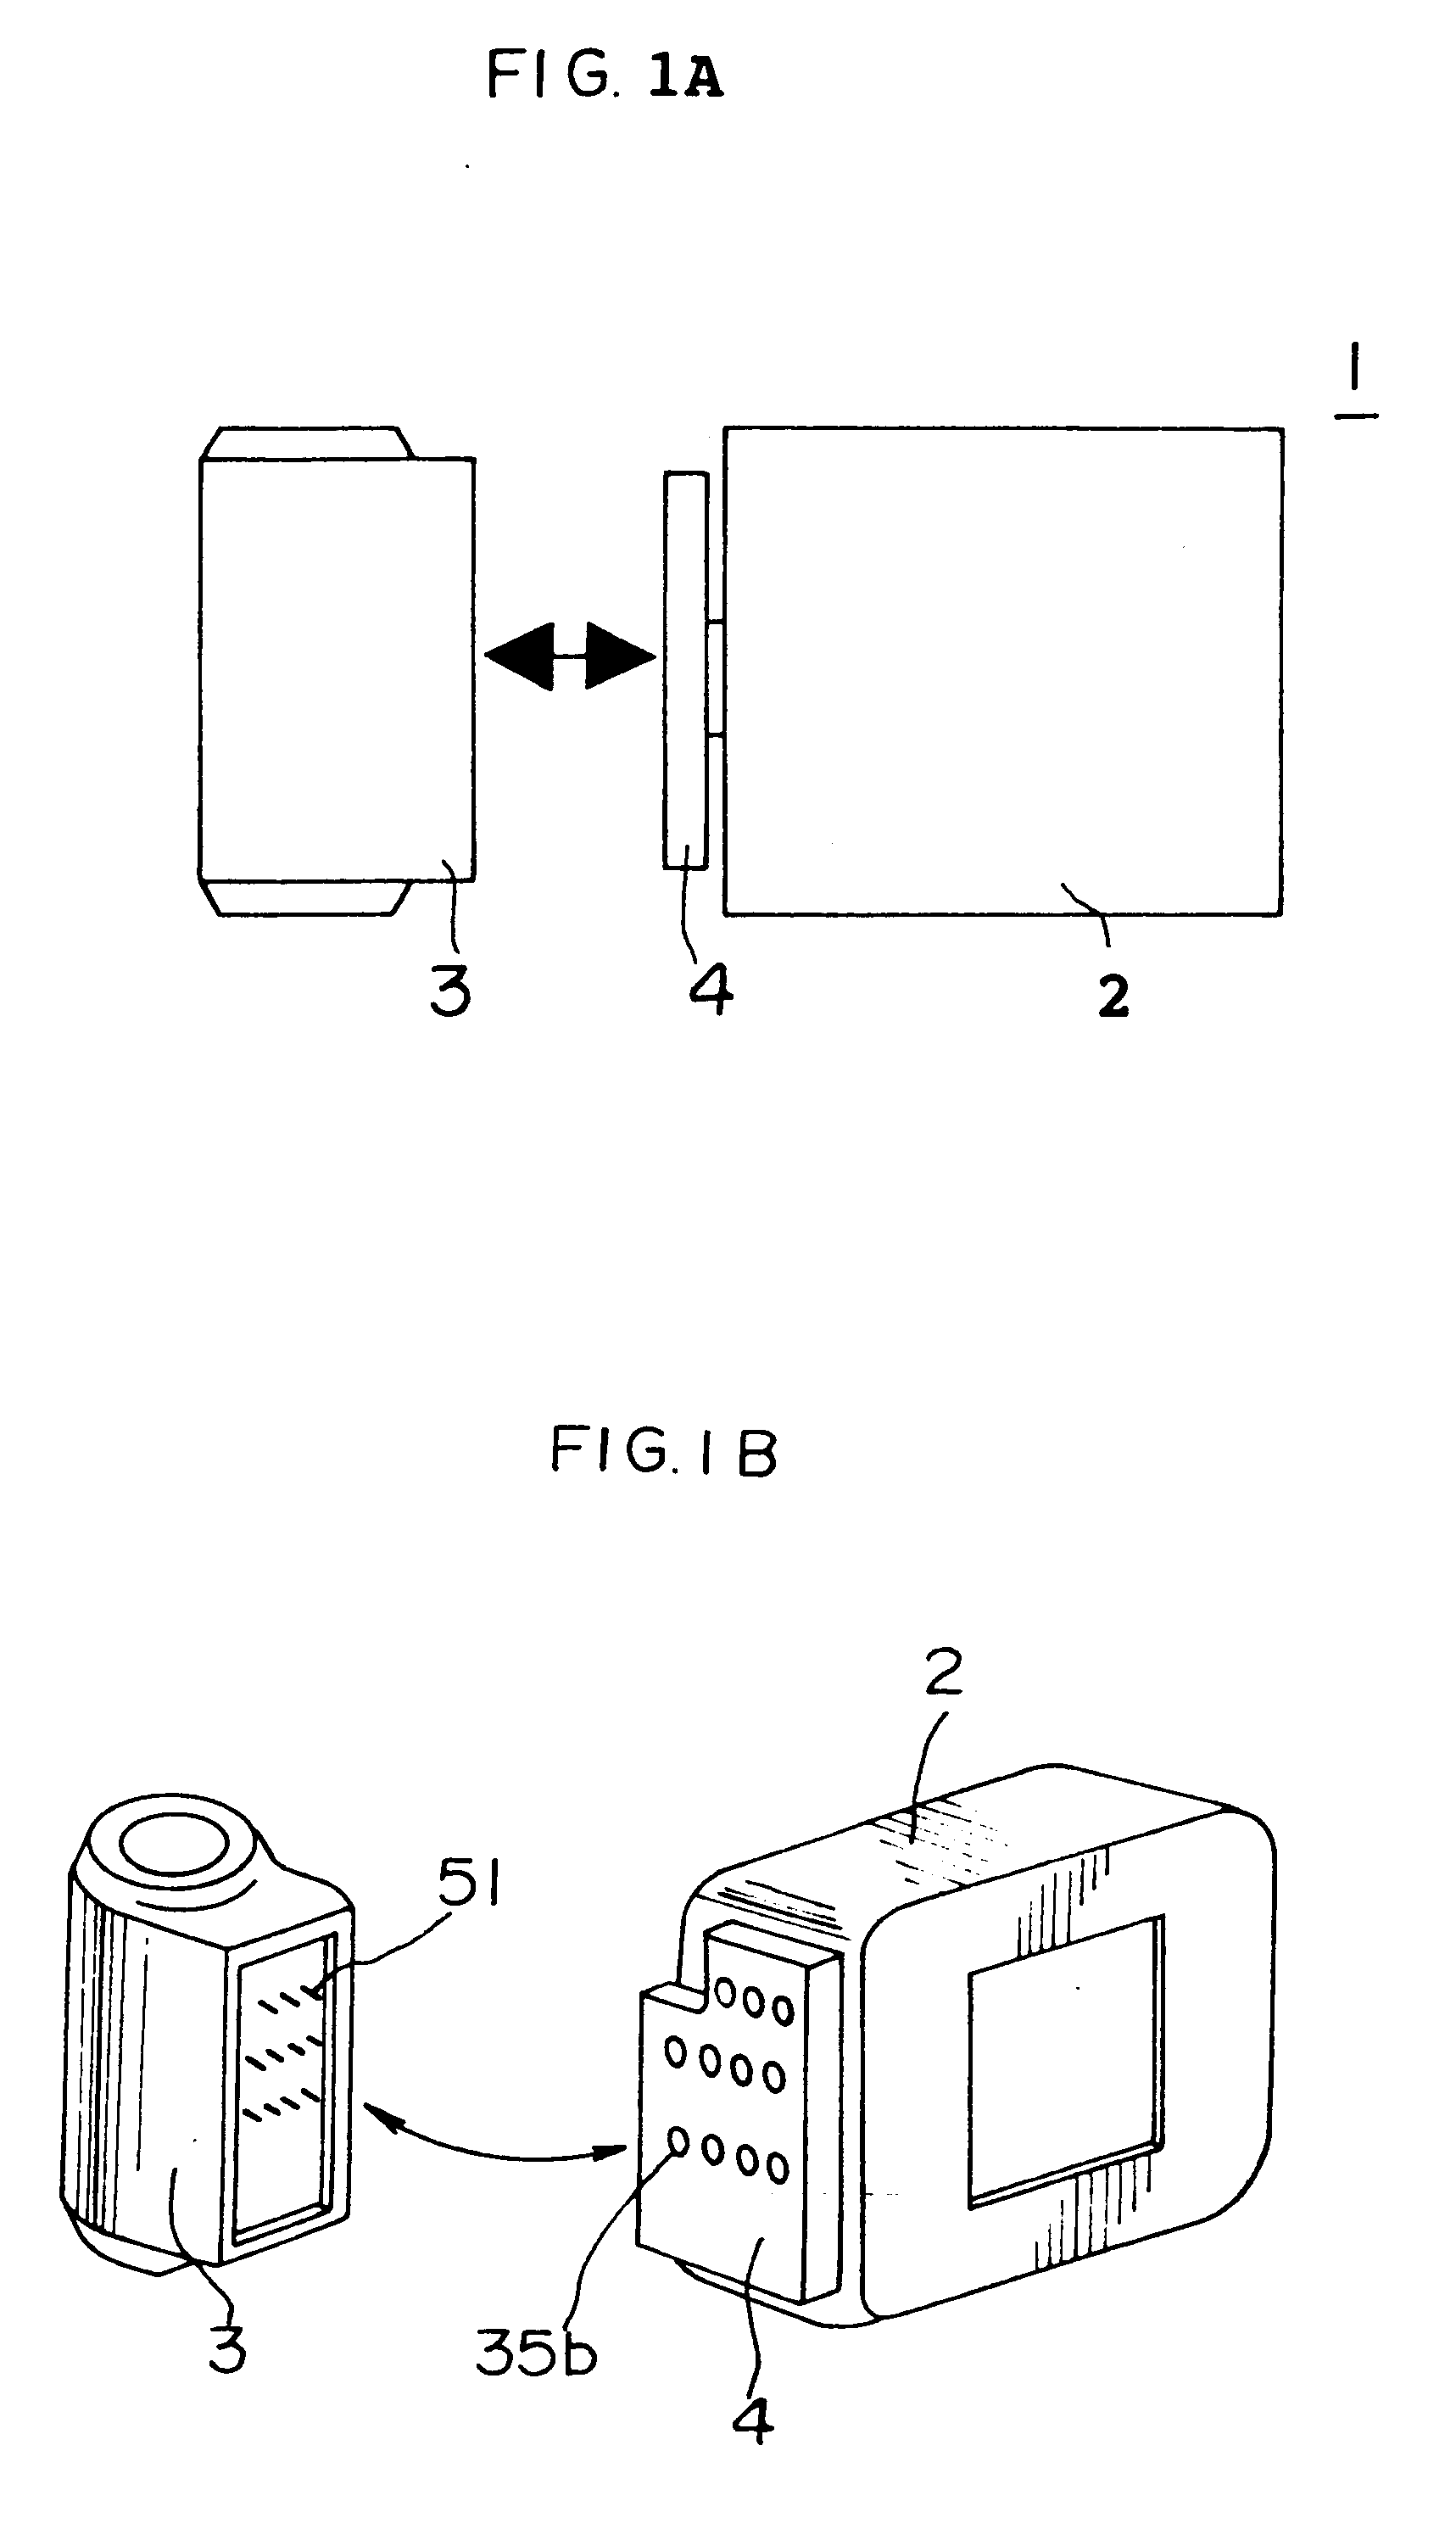 Image recording device having a ground connector